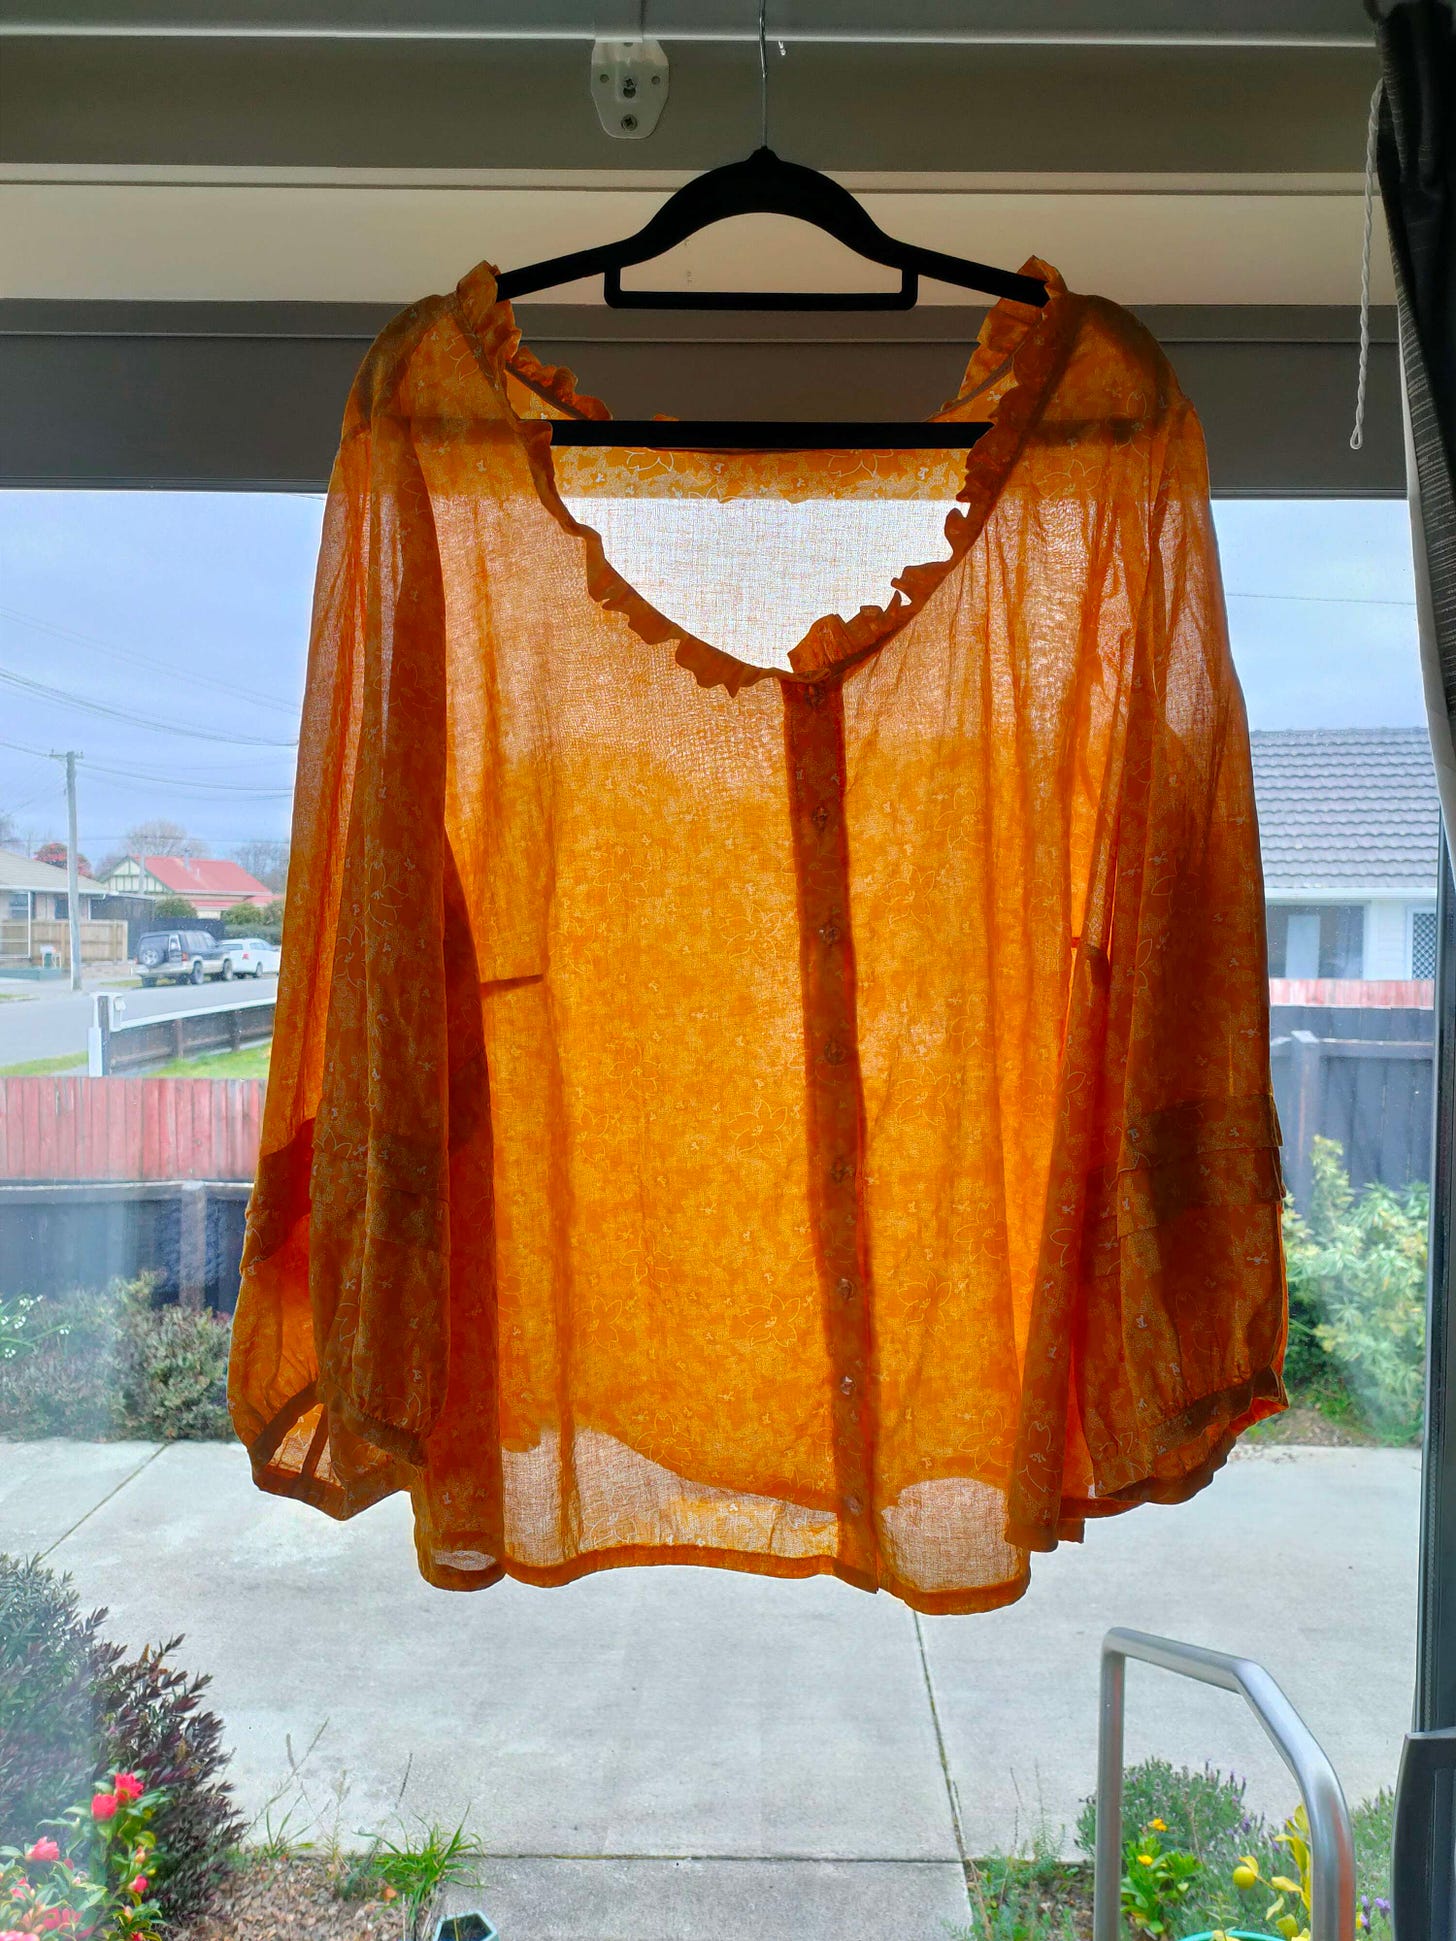 A yellow-orange blouse, semi-translucent against the light, hangs from a clothes hanger hooked over a curtain rail. The blouse has a ruffled neck that took approximately forever, and tuck sleeve details that are barely noticeable because of the lovely floral pattern, but I'm sill very proud of how neatly I managed them.